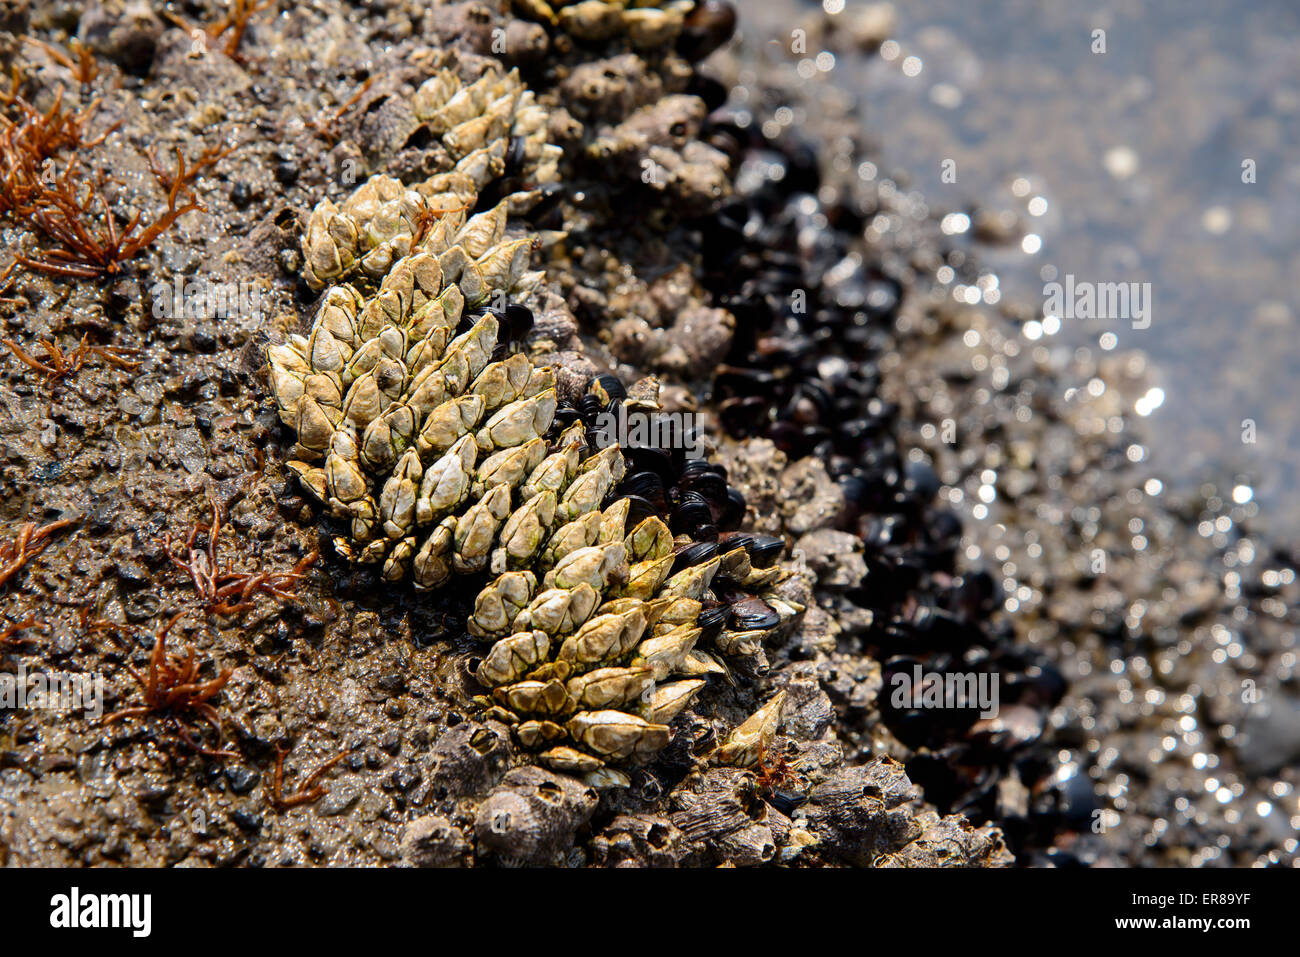 Common stalked barnacle (Pollicipes mitella) at a rock in a seaside Stock Photo